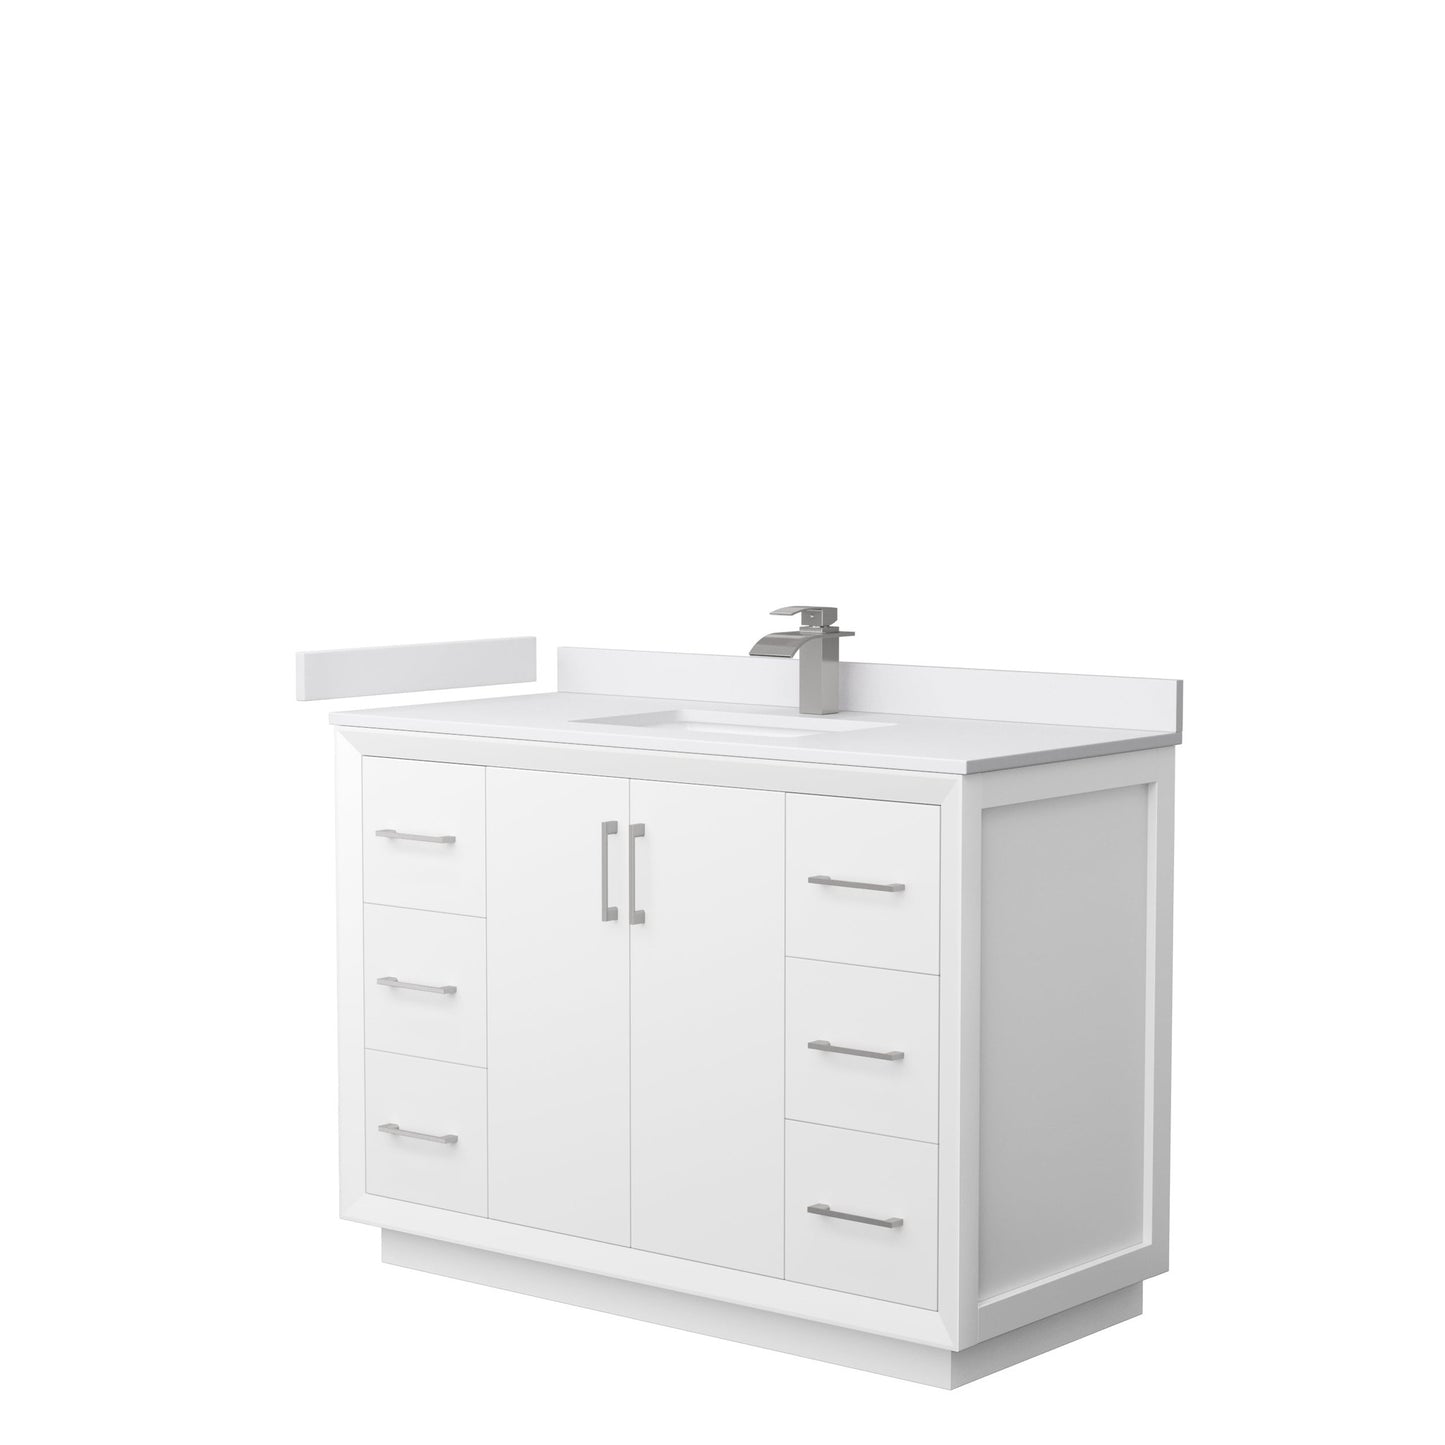 Wyndham Collection Strada 48" Single Bathroom Vanity in White, White Cultured Marble Countertop, Undermount Square Sink, Brushed Nickel Trim